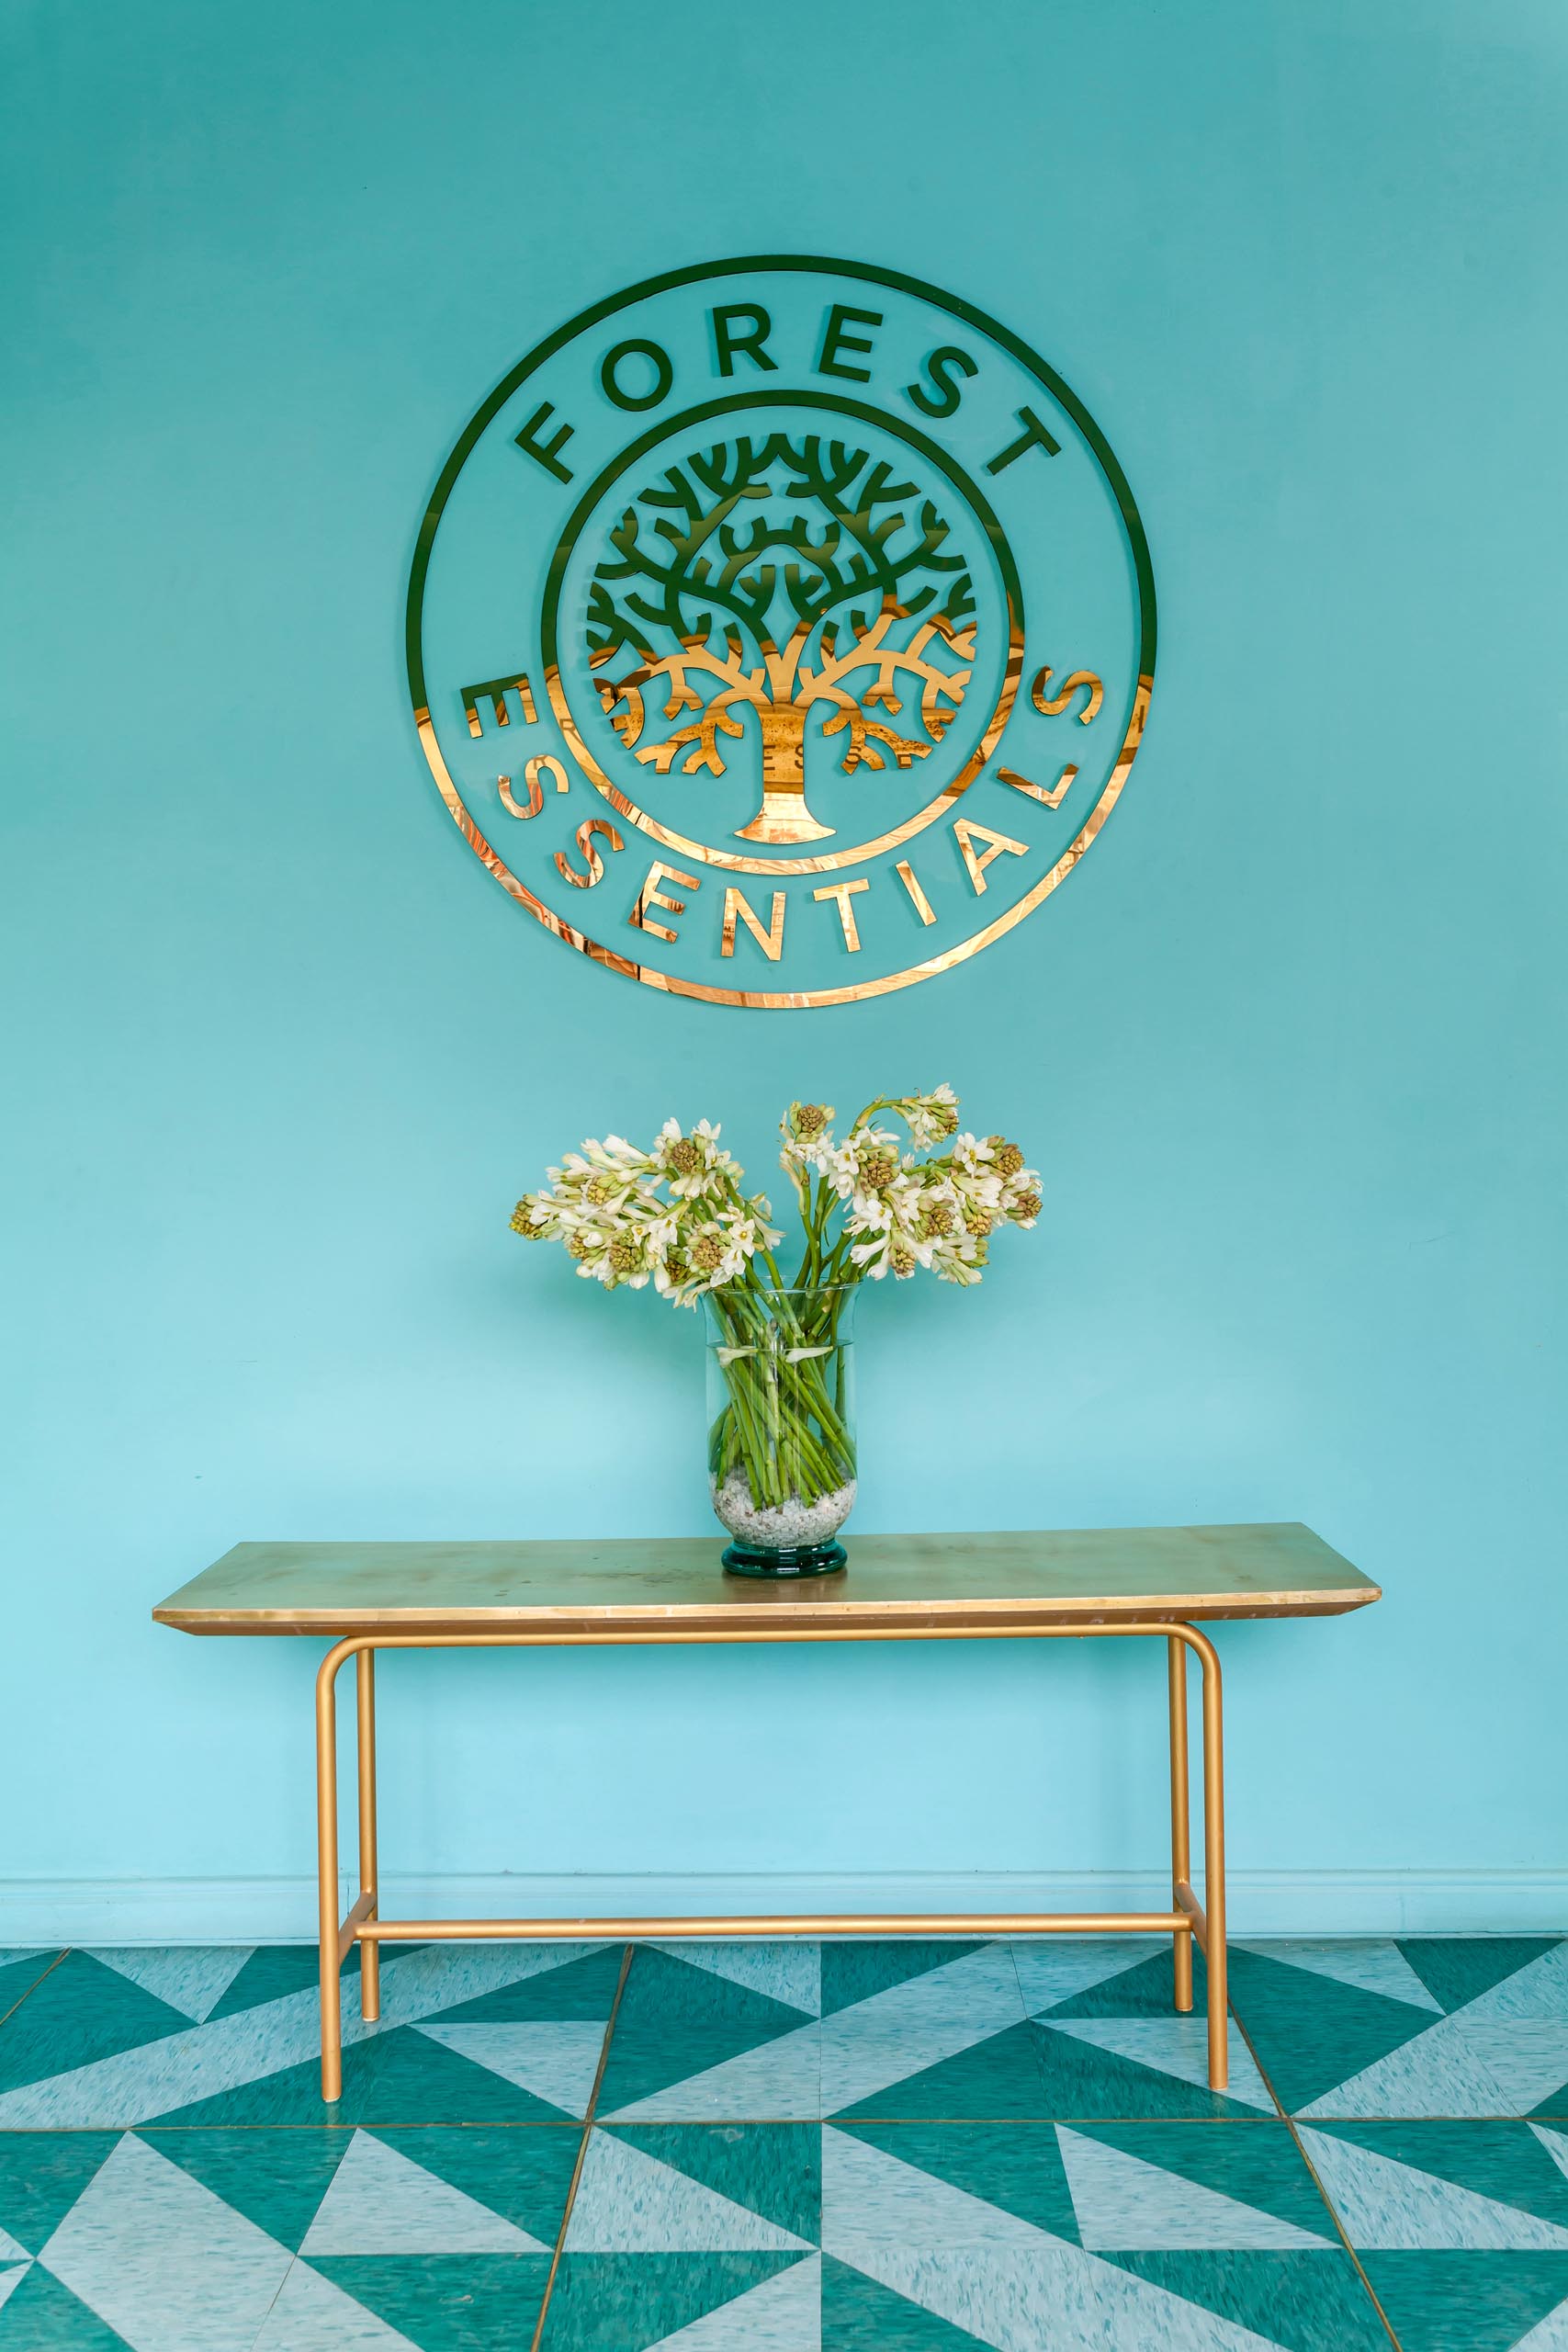 A modern retail store entryway with teal walls, a gold logo, a gold bench, and patterned floor.